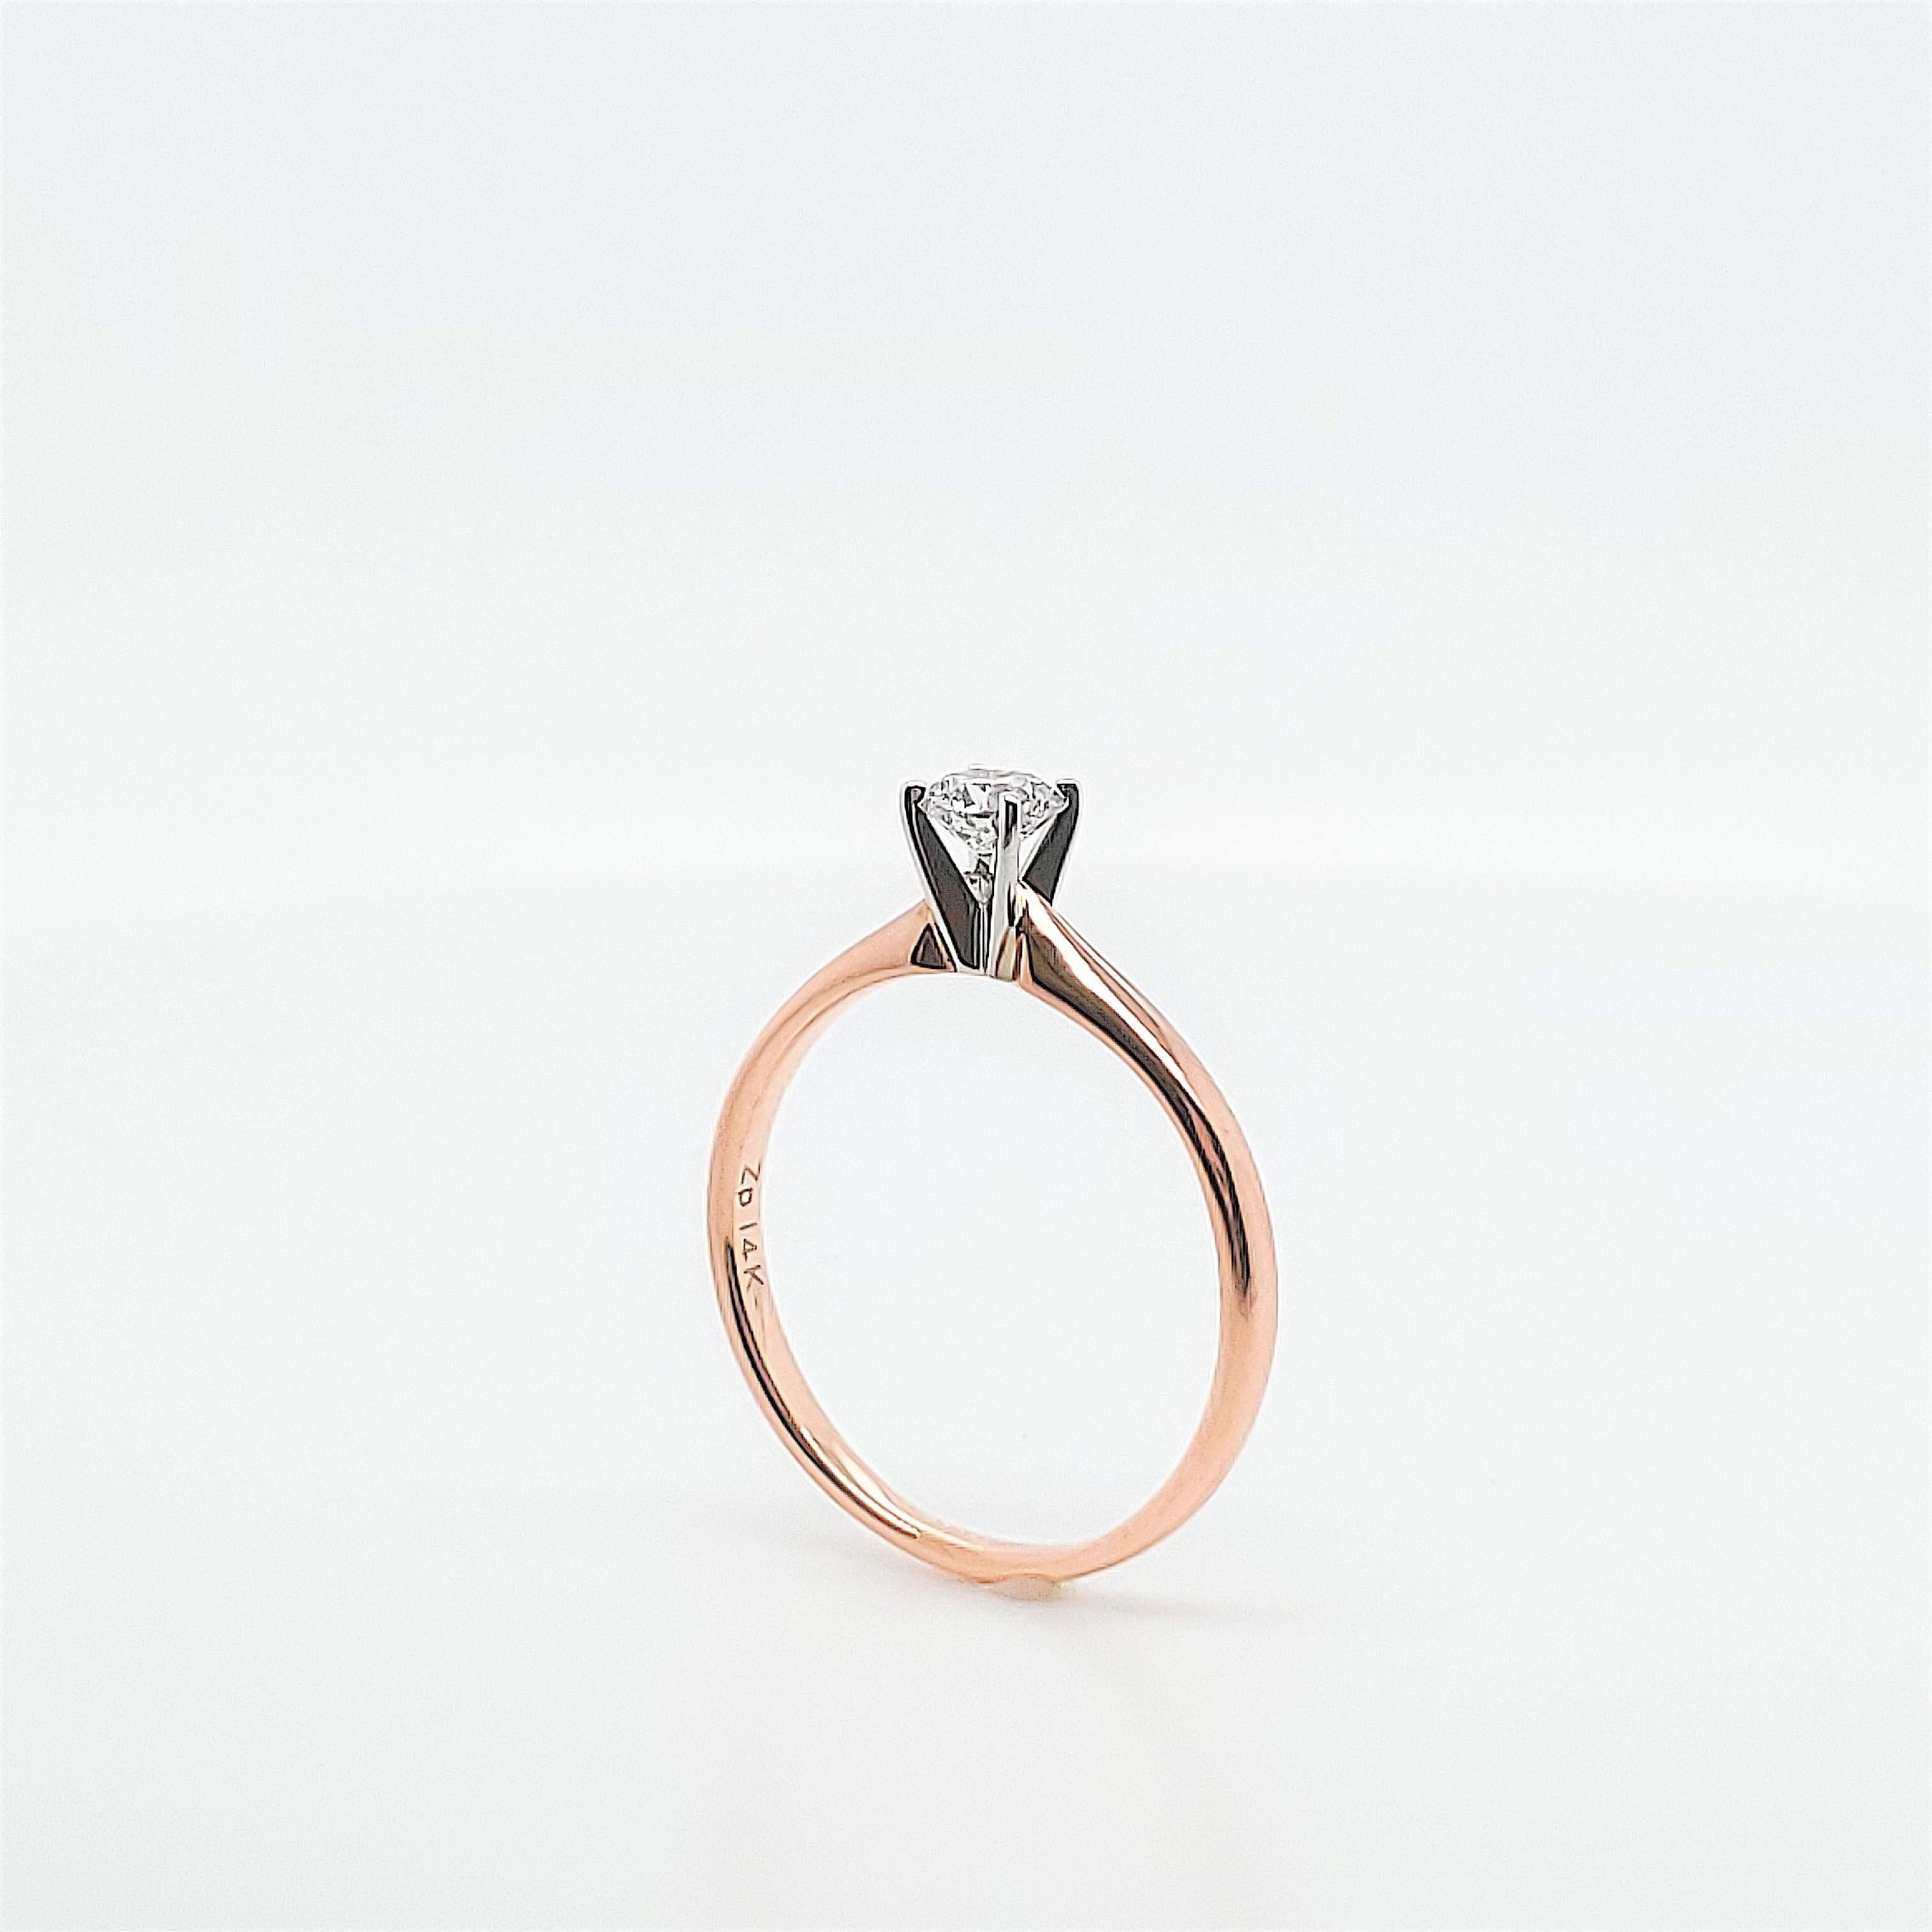 Diamond Solitaire engagement ring crafted in 14 karat rose gold.  Featuring a single round brilliant ct diamond weighing approximately .26ct, G color, SI2 clarity.  Signed Zp, 14K.  Size 6 1/2, can be sized.  Circa 2010s